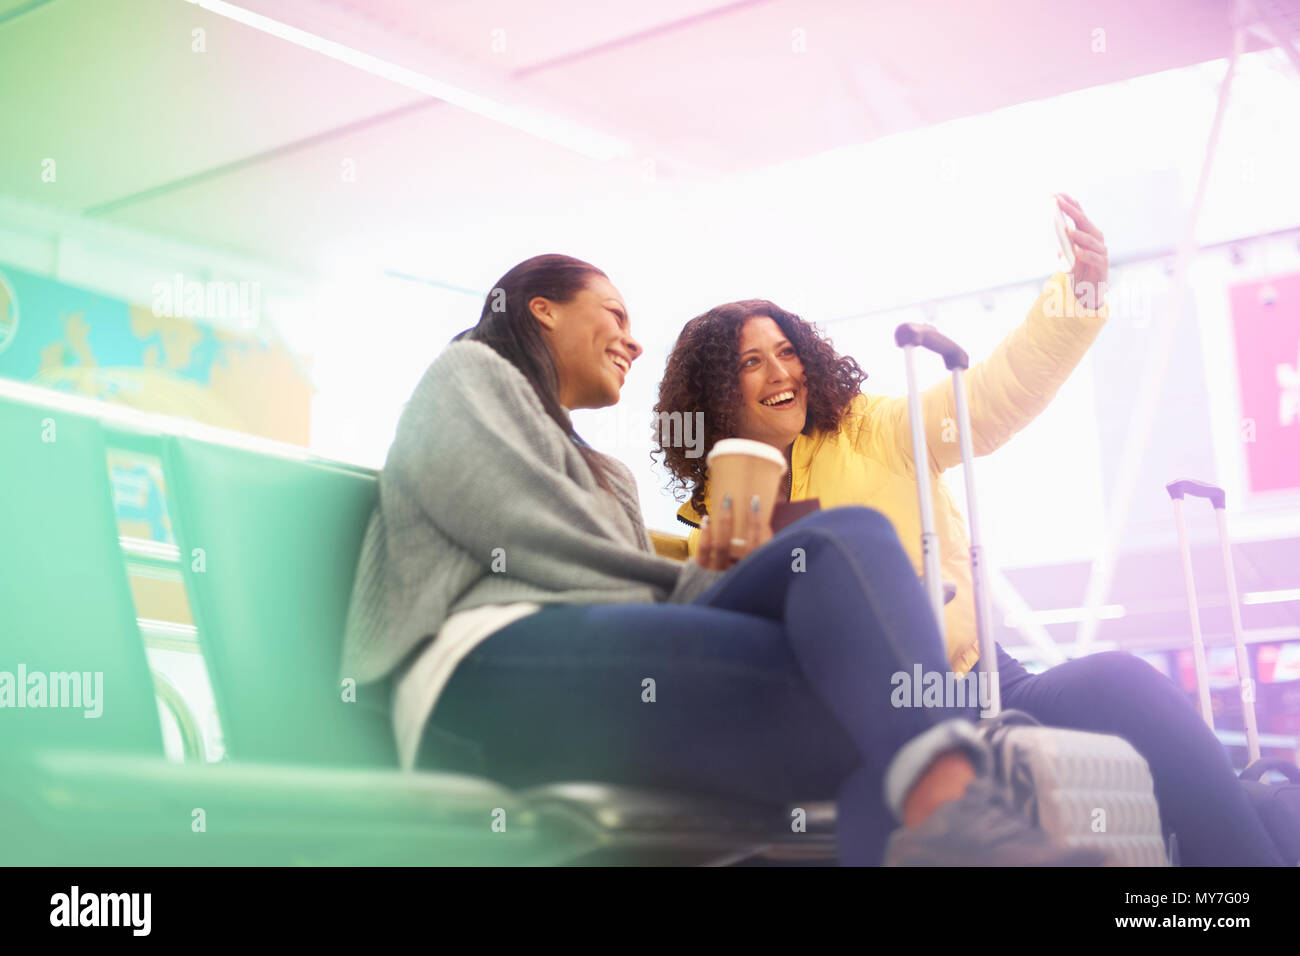 Two mid adult women taking selfie in airport departure lounge Stock Photo